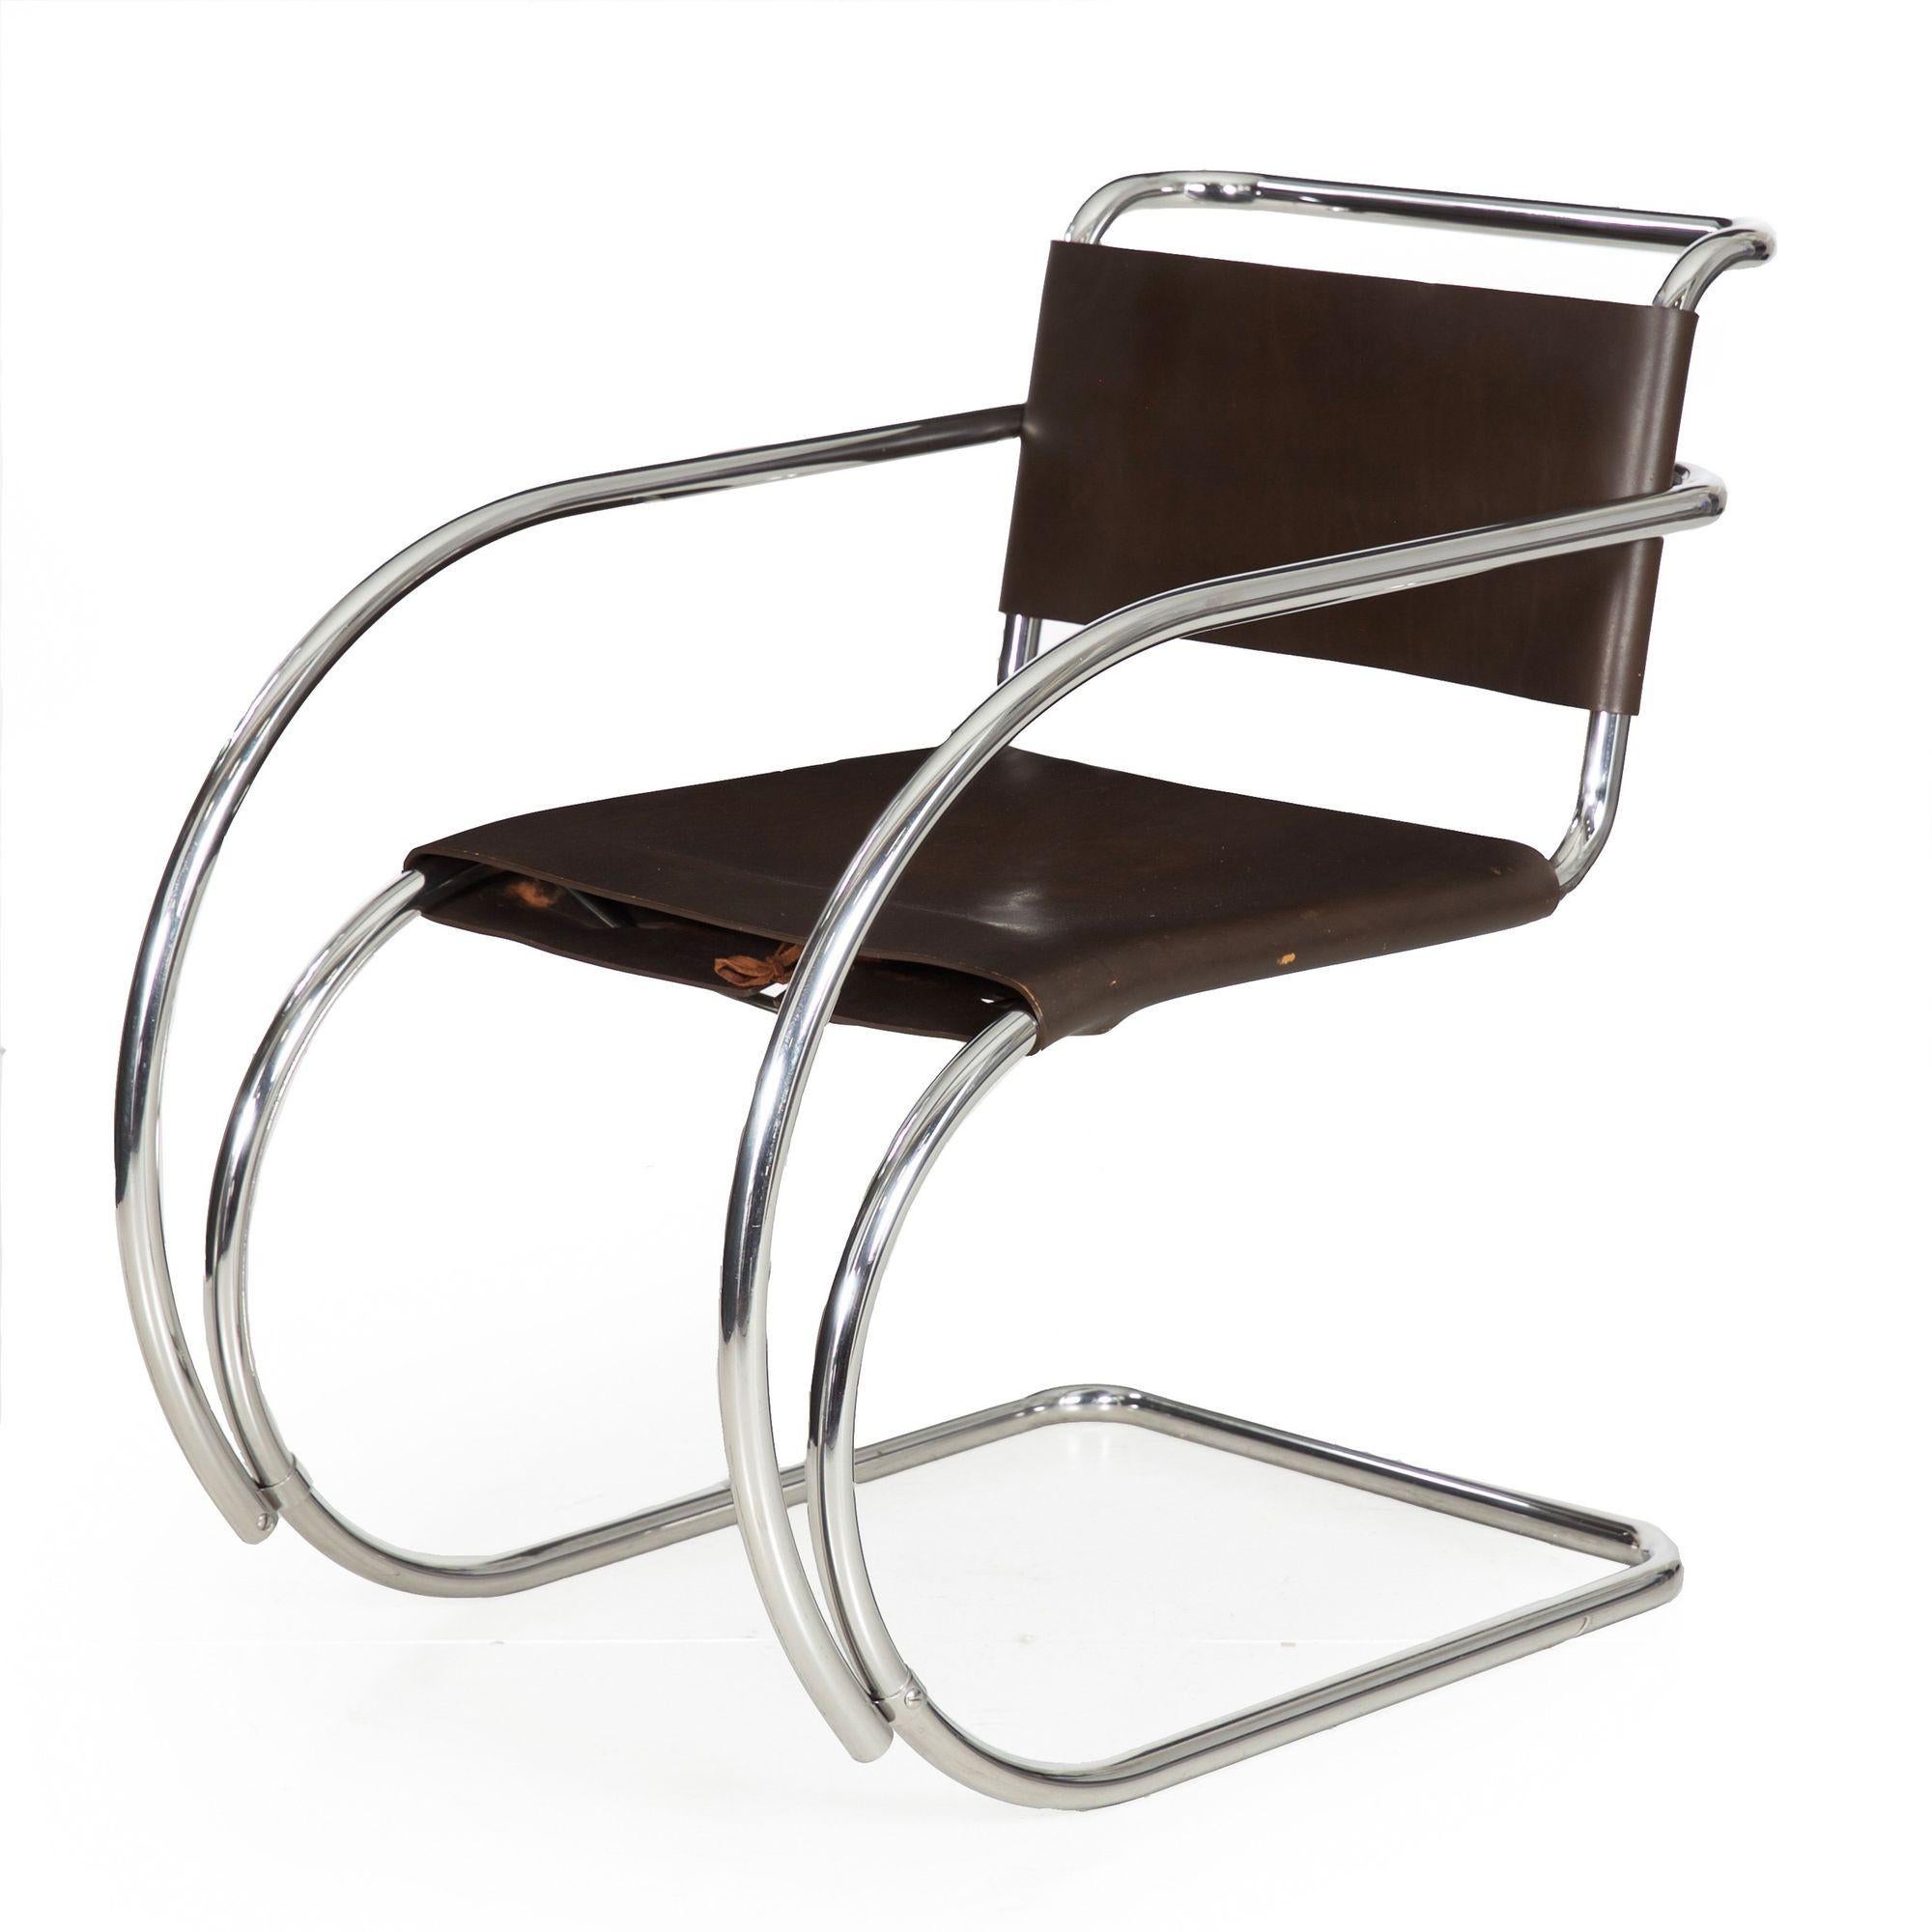 CHROME STEEL AND LEATHER MR20 ARMCHAIR
Designed by Mies van der Rohe, circa 1970s
Item # 205RSJ14P 

An iconic chair by Mies van der Rohe, this fine chromed steel and saddle leather MR20 armchair remains in excellent vintage condition. Likely